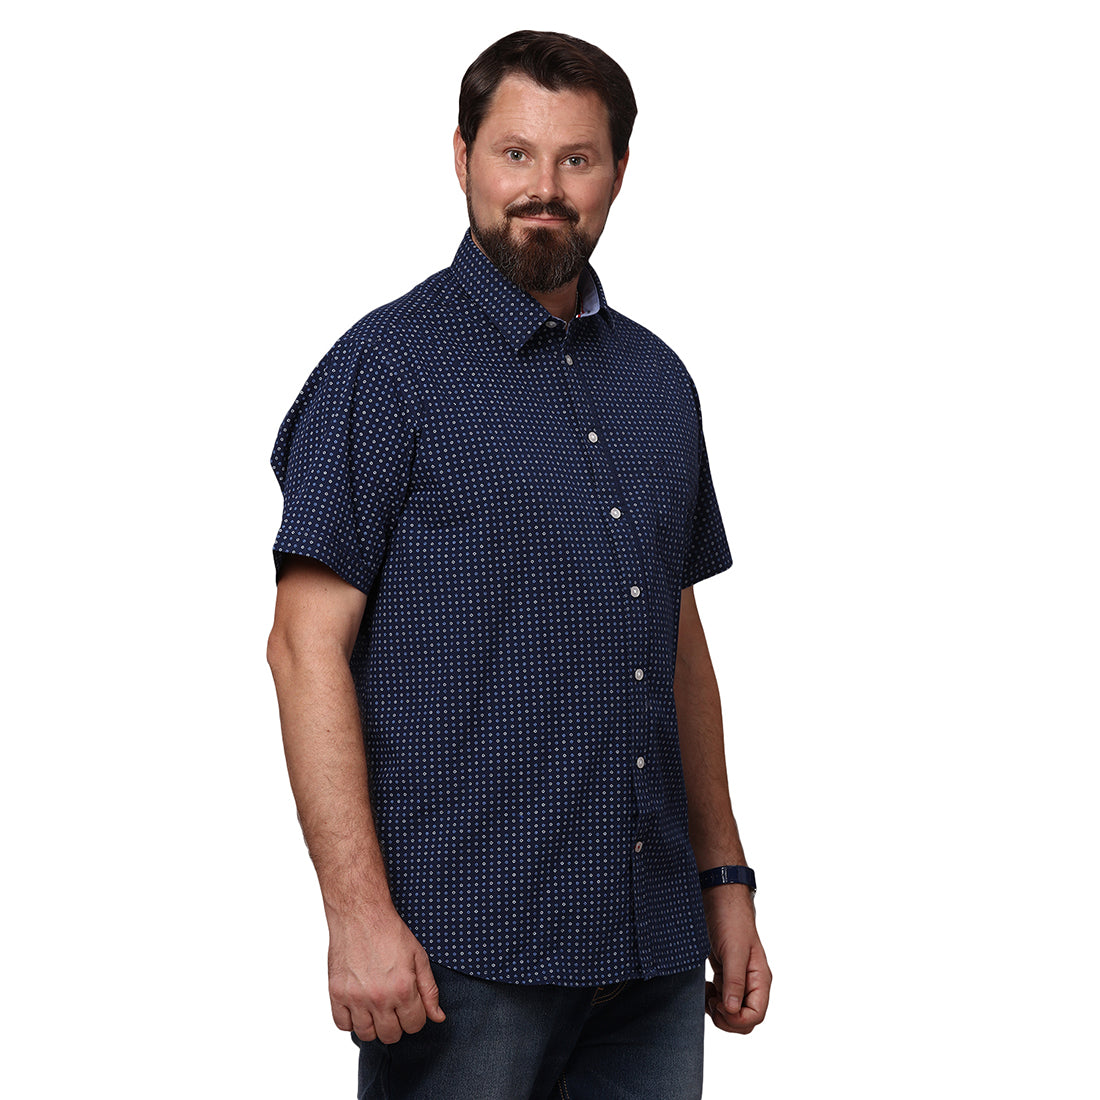 Big & Bold Print Navy Blue Half Sleeves Slim Fit Casual Shirts (Plus Size) - Double Two